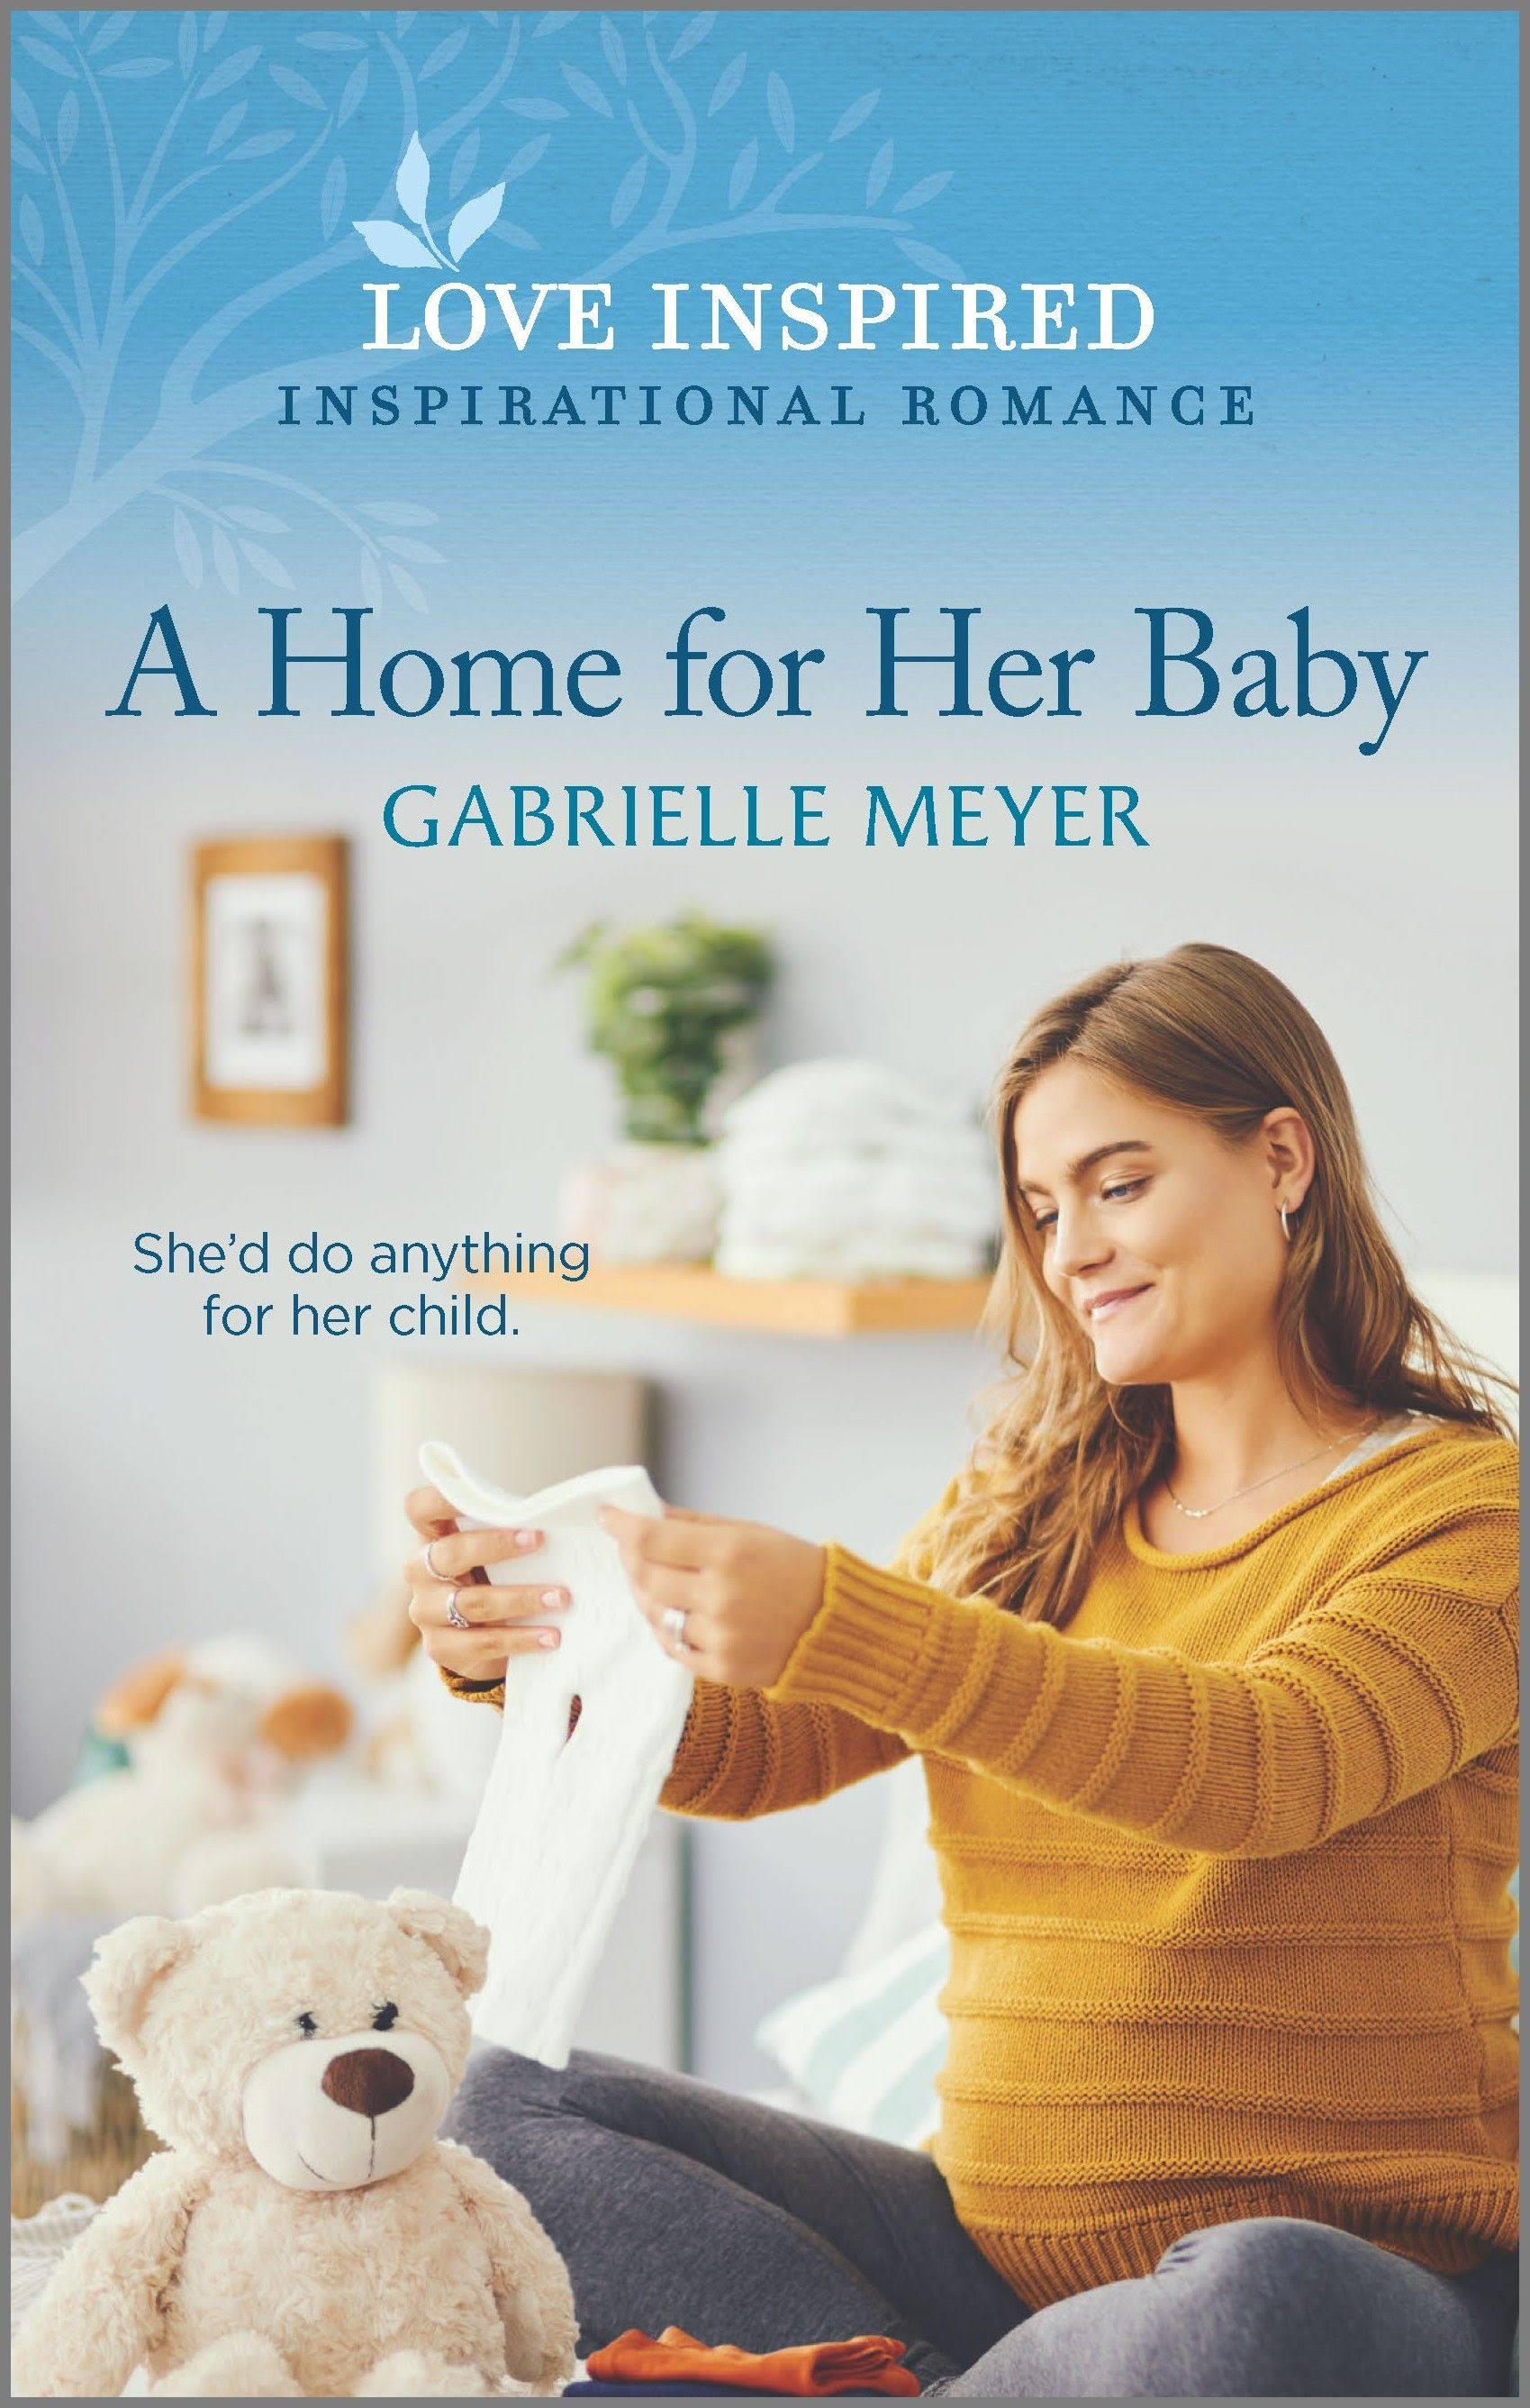 A Home for Her Baby [Book]